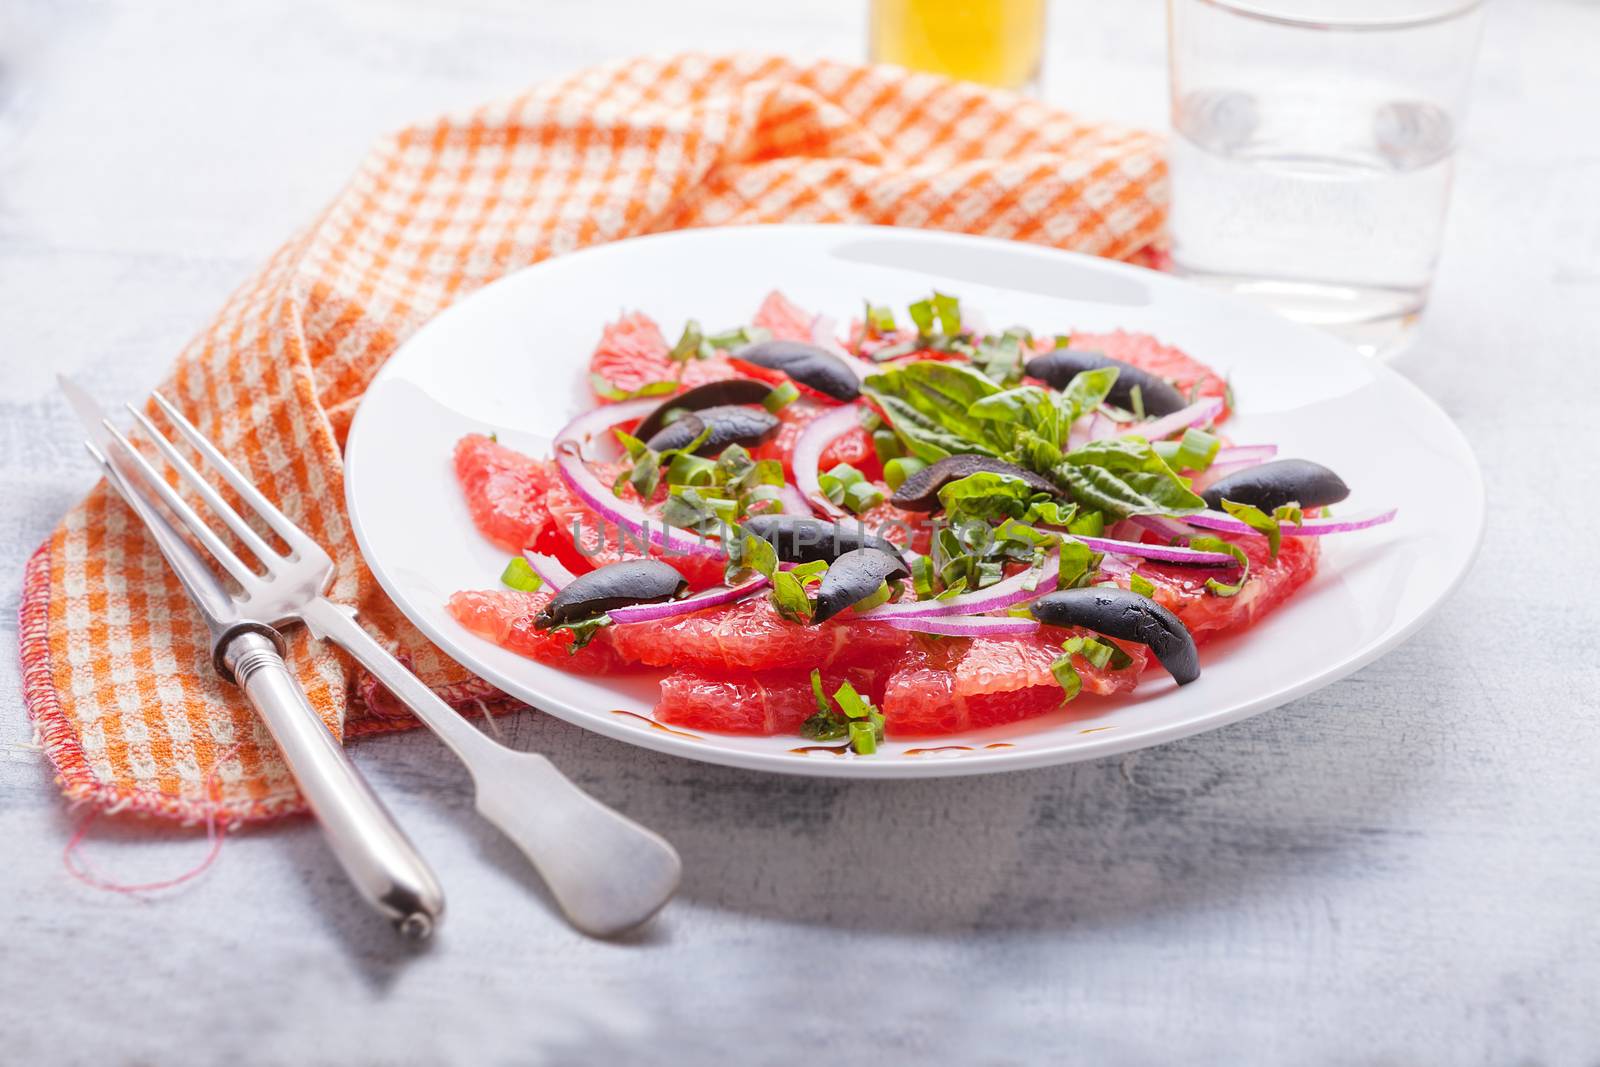 Grapefruit salad with olives, red onion, basil by supercat67